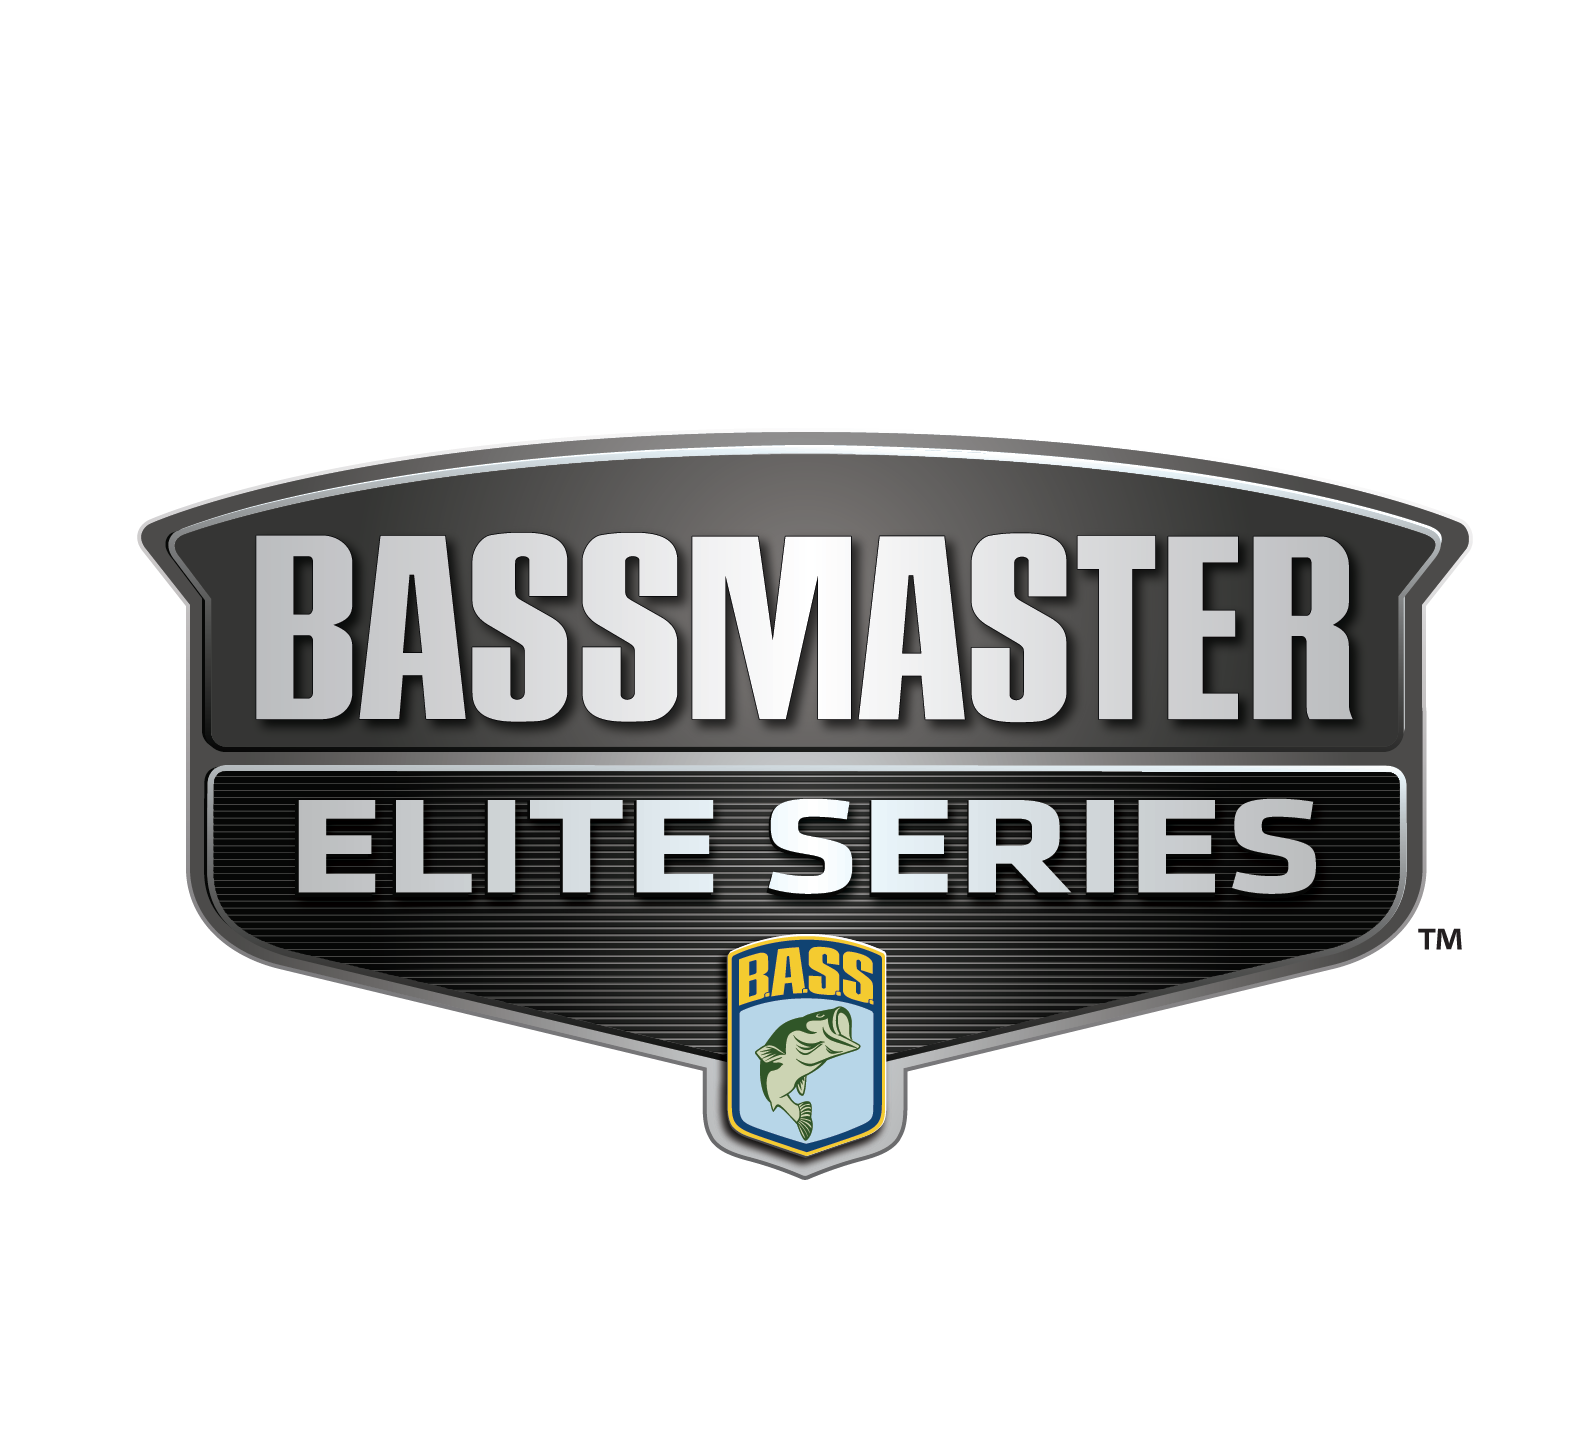 The Bassmaster Elite Series field is set for the 2021 season. The field is compiled of returning angler from the 2020 Bassmaster Elite Series, 12 new anglers from the Basspro.com Bassmaster Opens and one B.A.S.S. Nation Champion. 